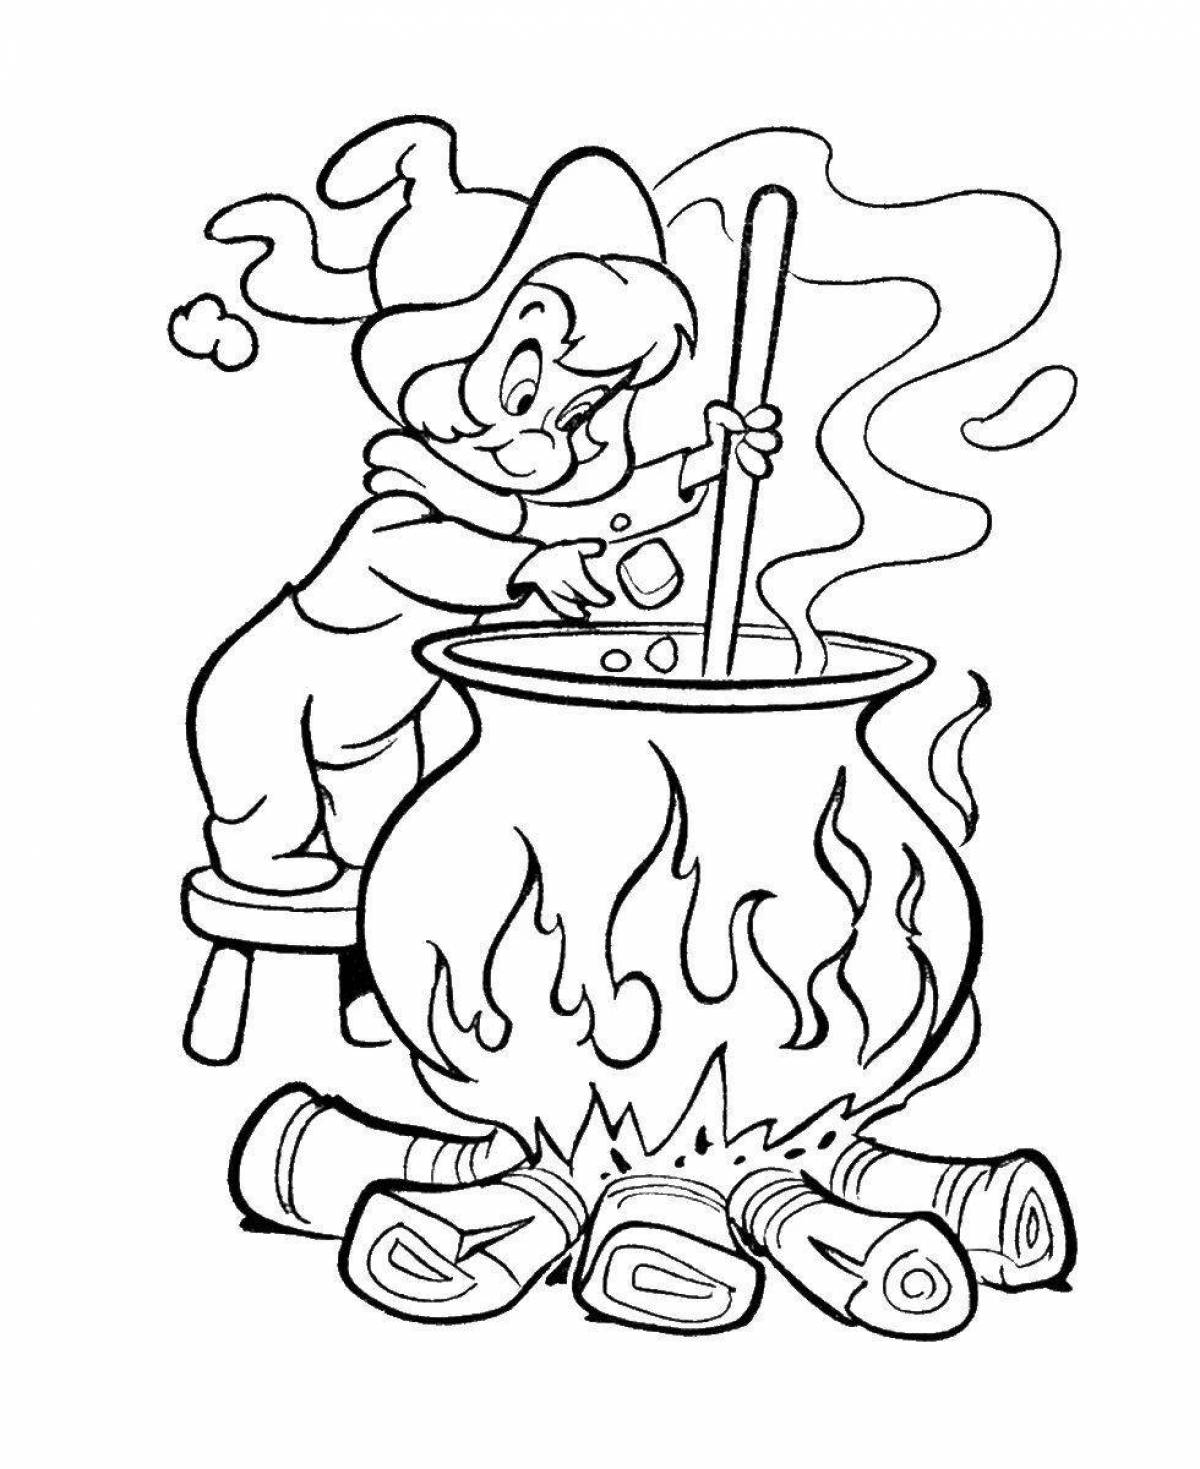 Funny fiery friend fiery enemy coloring pages for kids